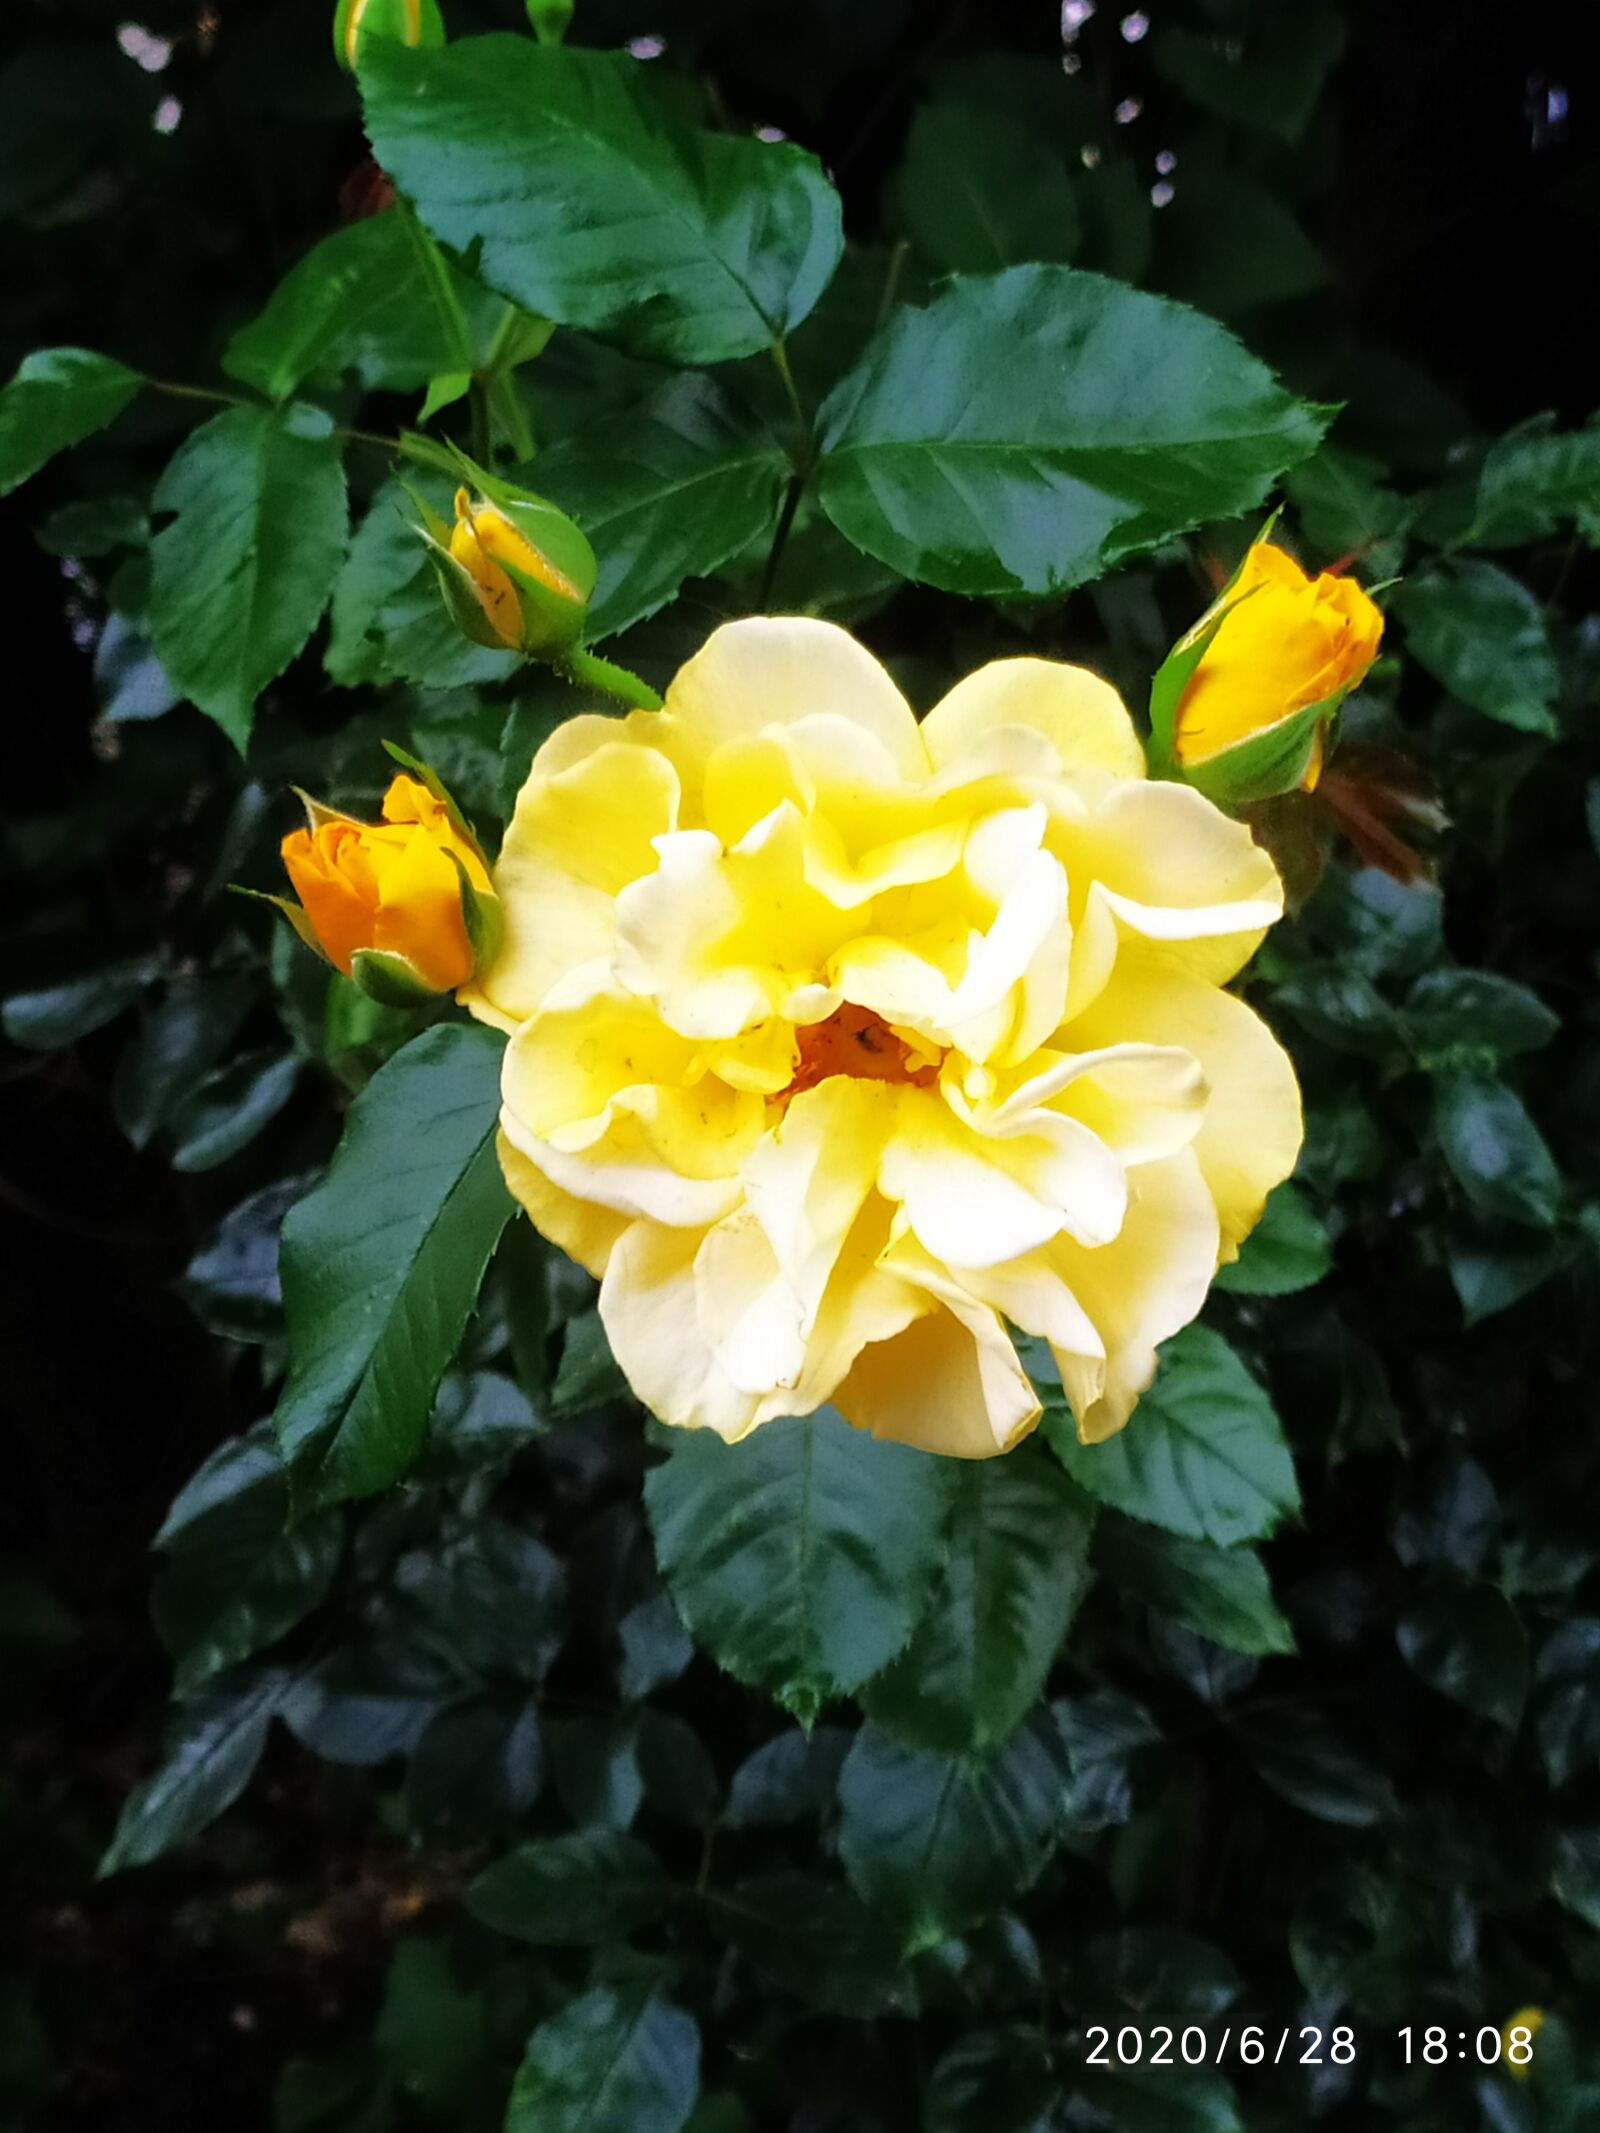 Xiaomi Redmi Note 7 sample photo. Flowers, nature, summer photography